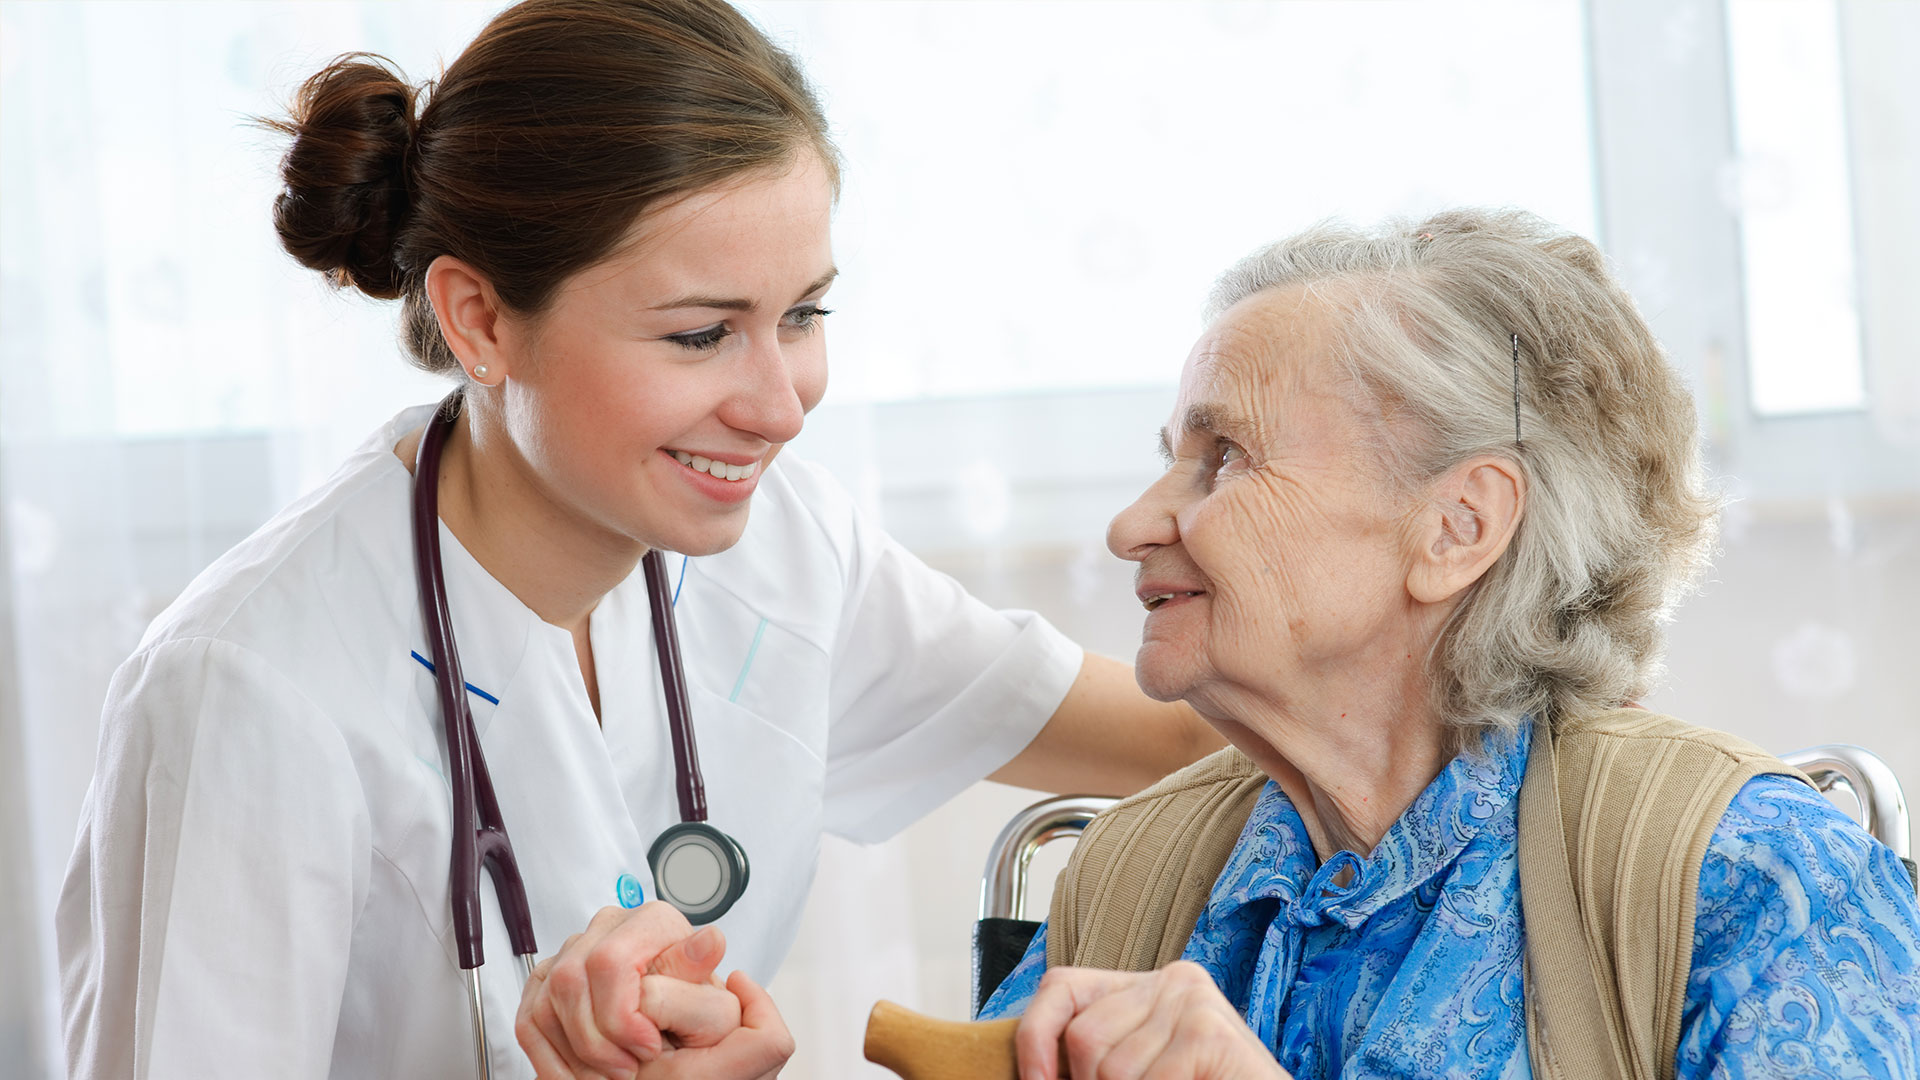 Physician Helping Older Woman and Smiling